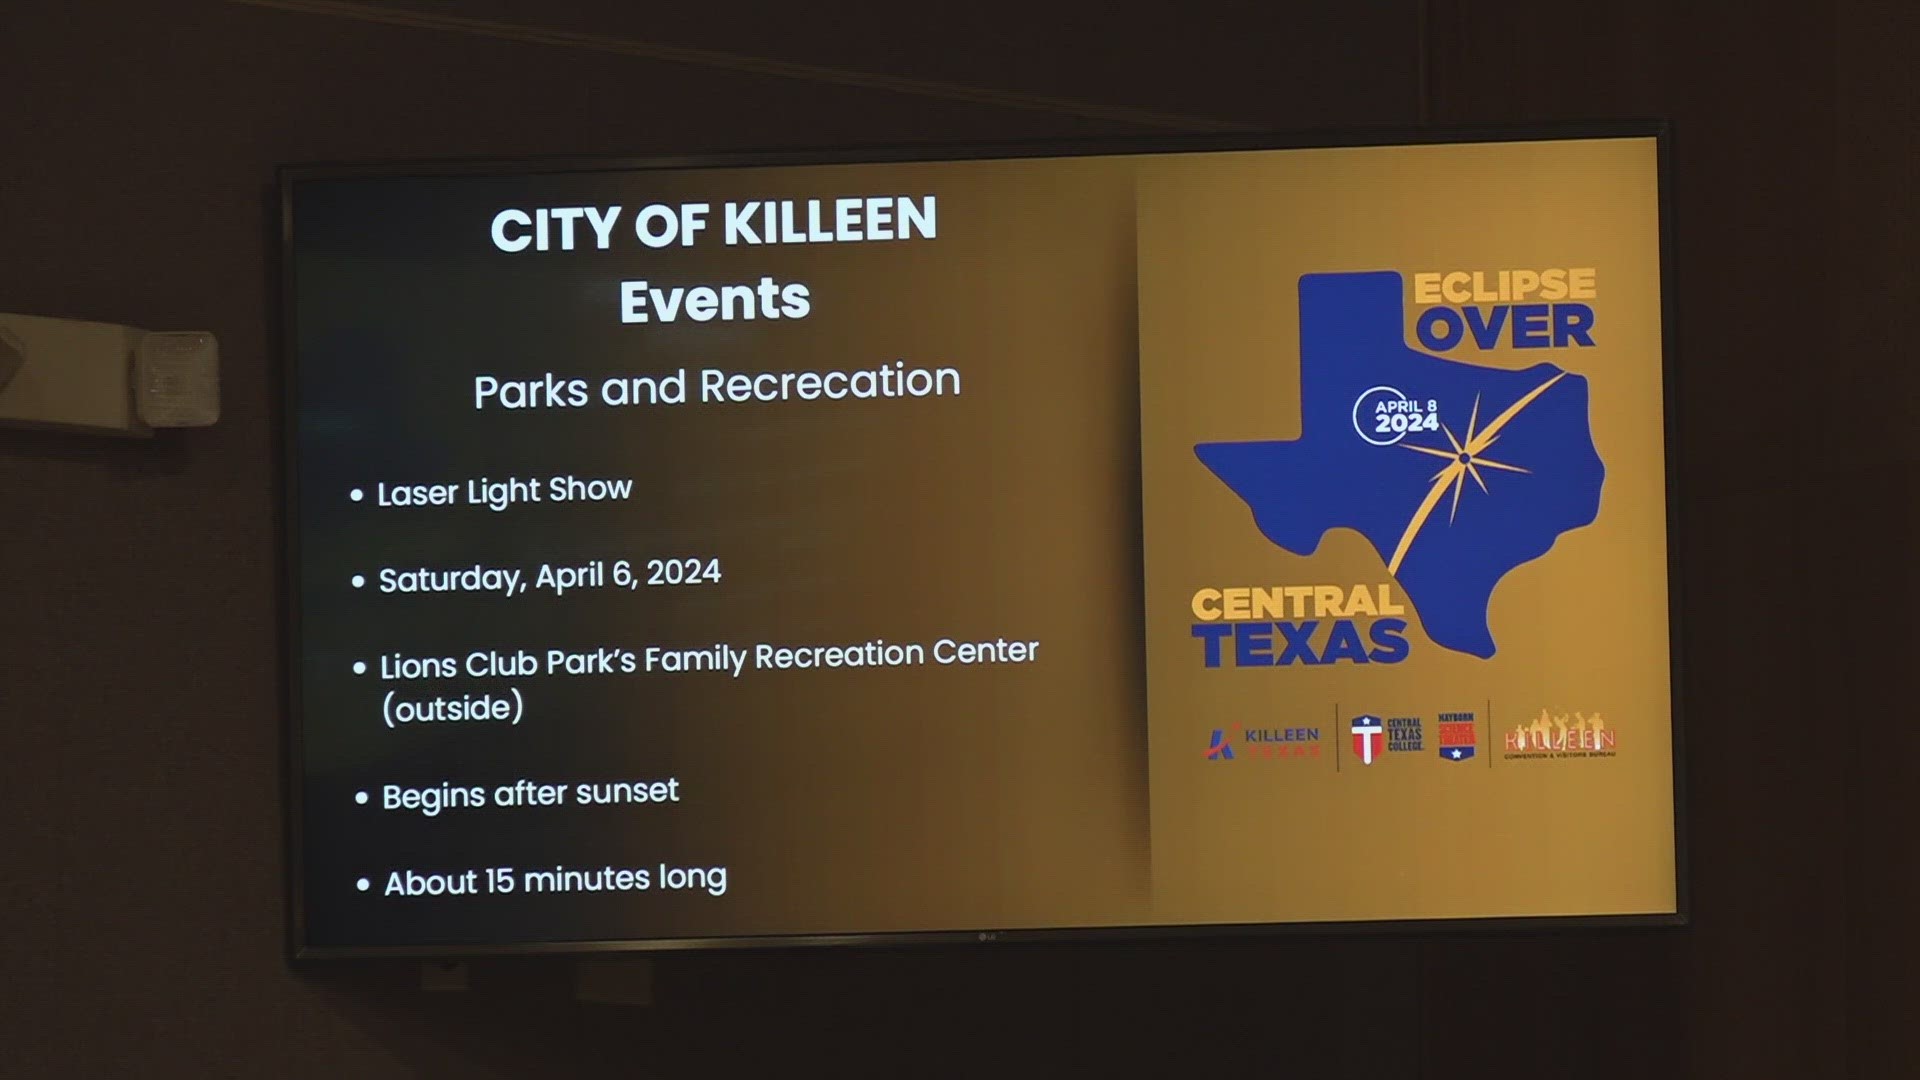 City of Killeen hosts eclipse eclipse town hall